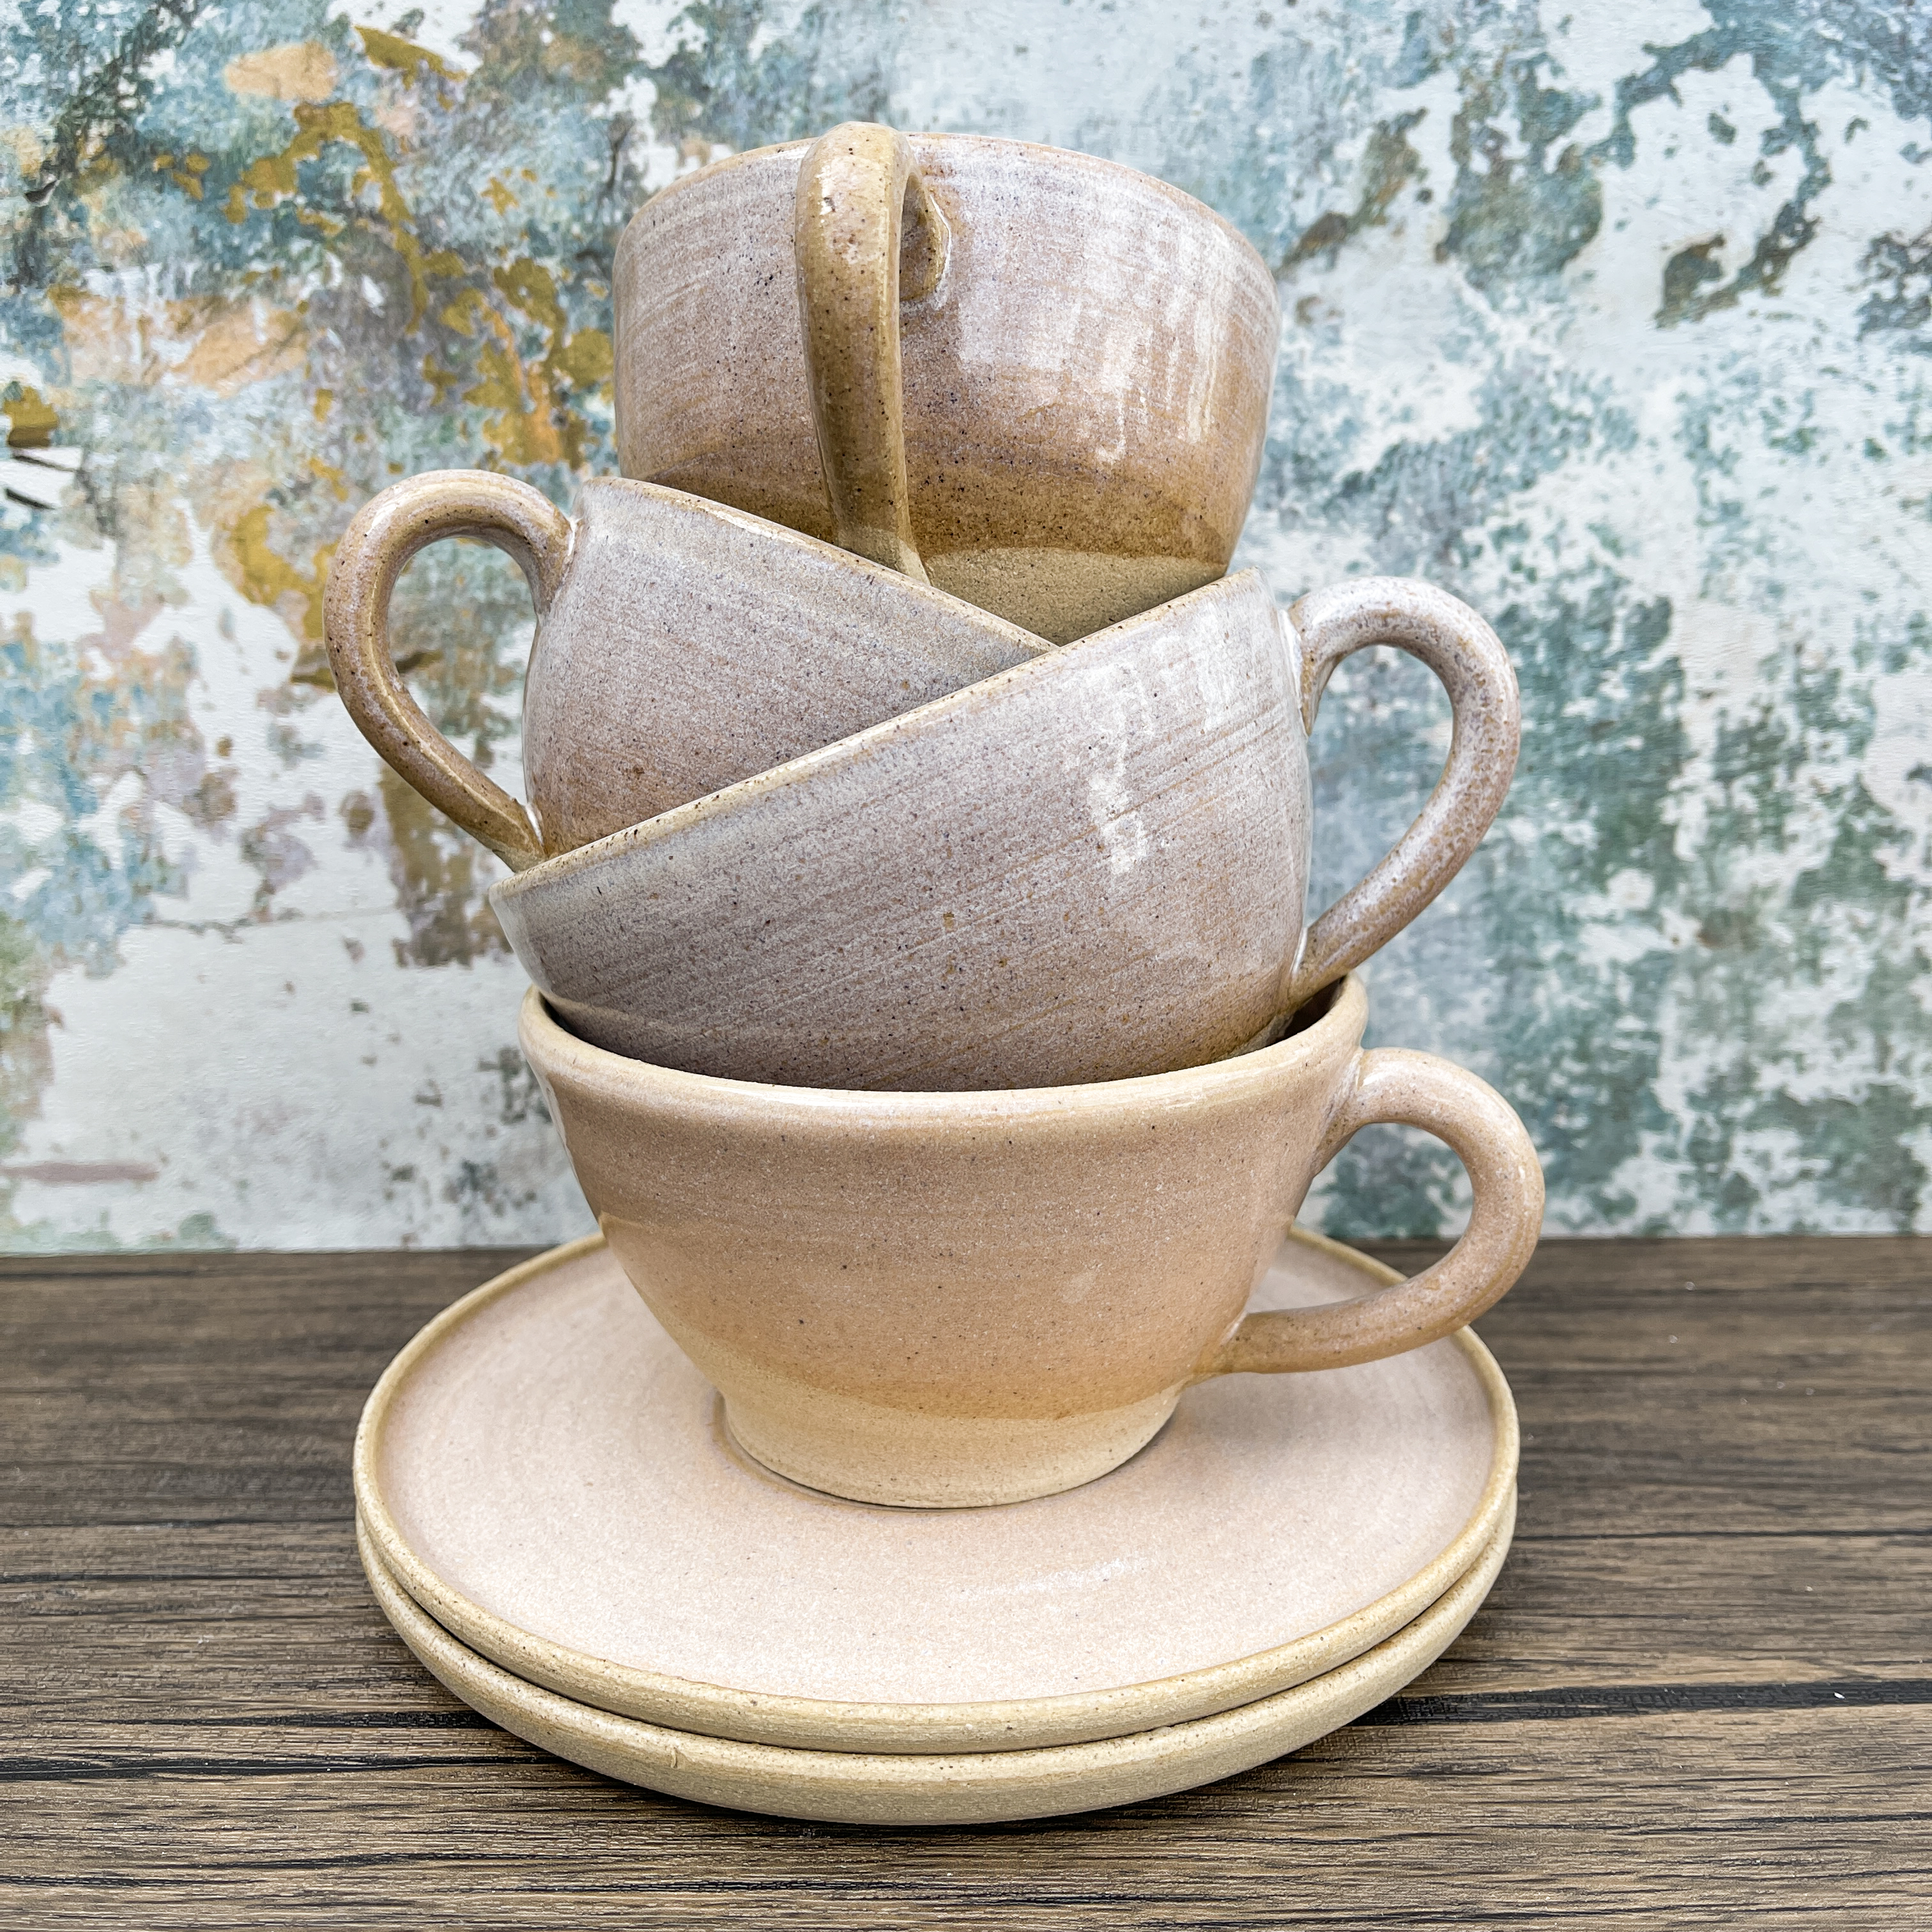 Three cappuccino cups stacked inside each other on a wooden tabletop